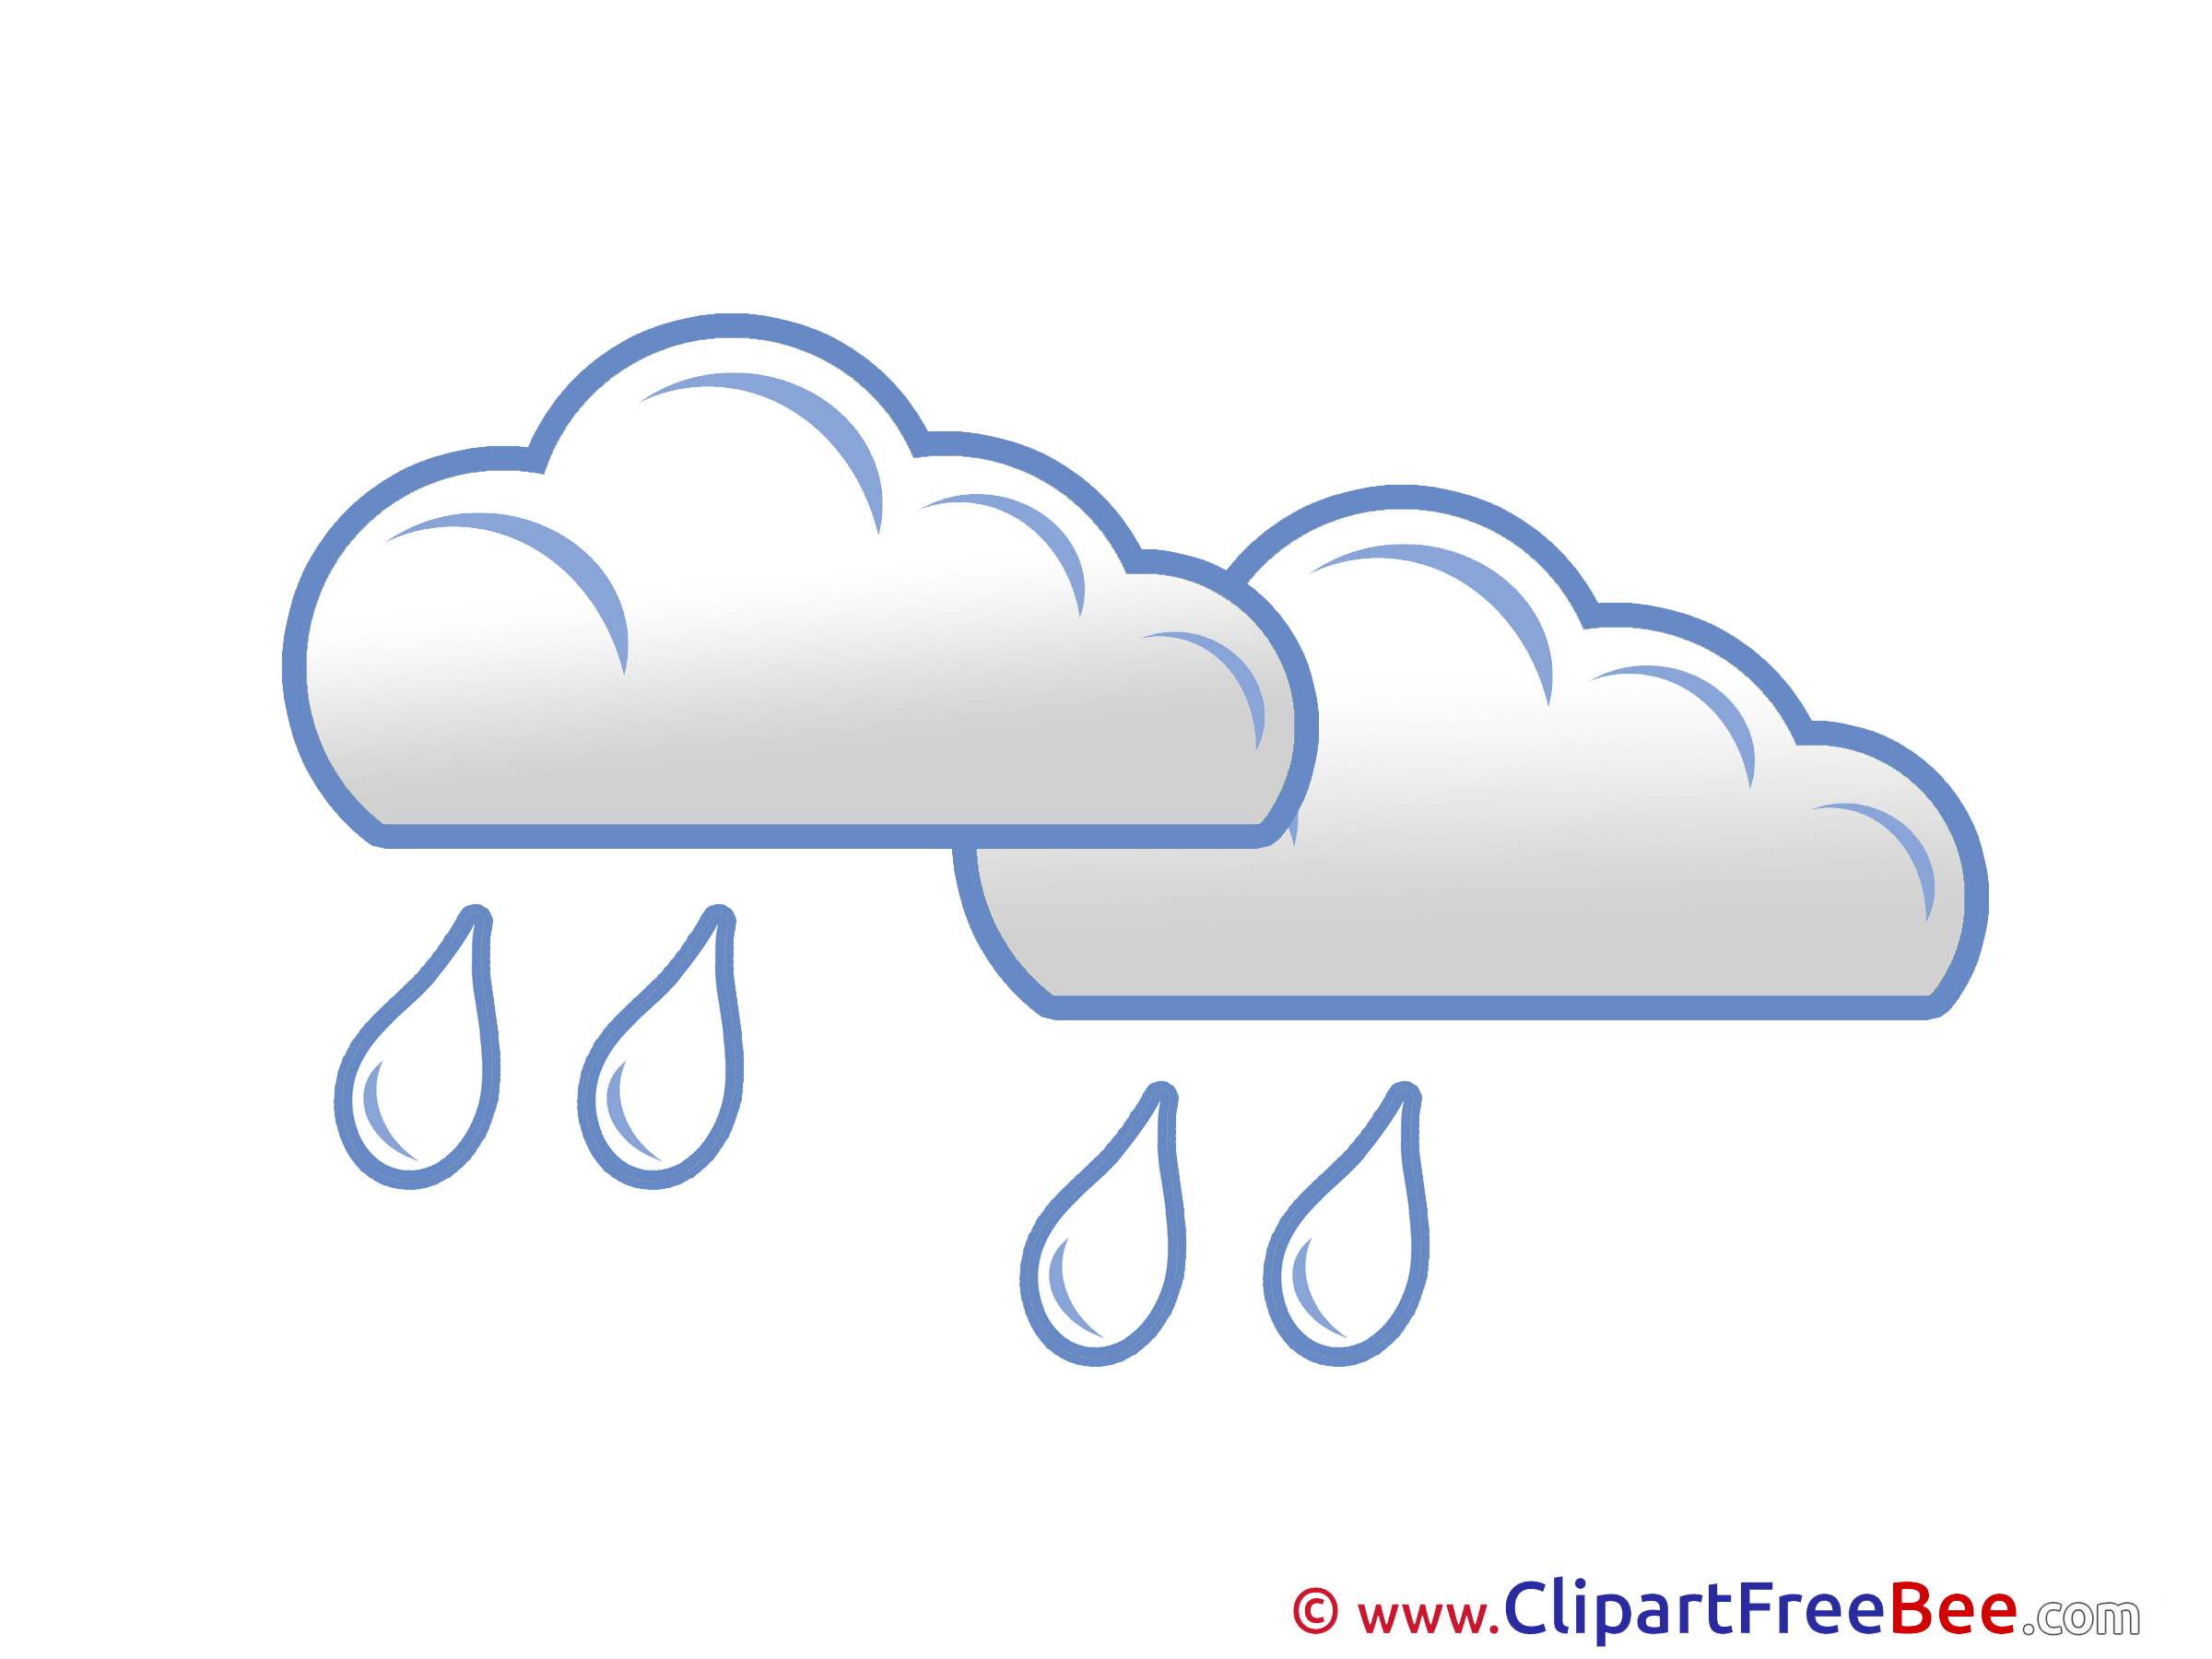 Sky Rain Clouds free Cliparts for download